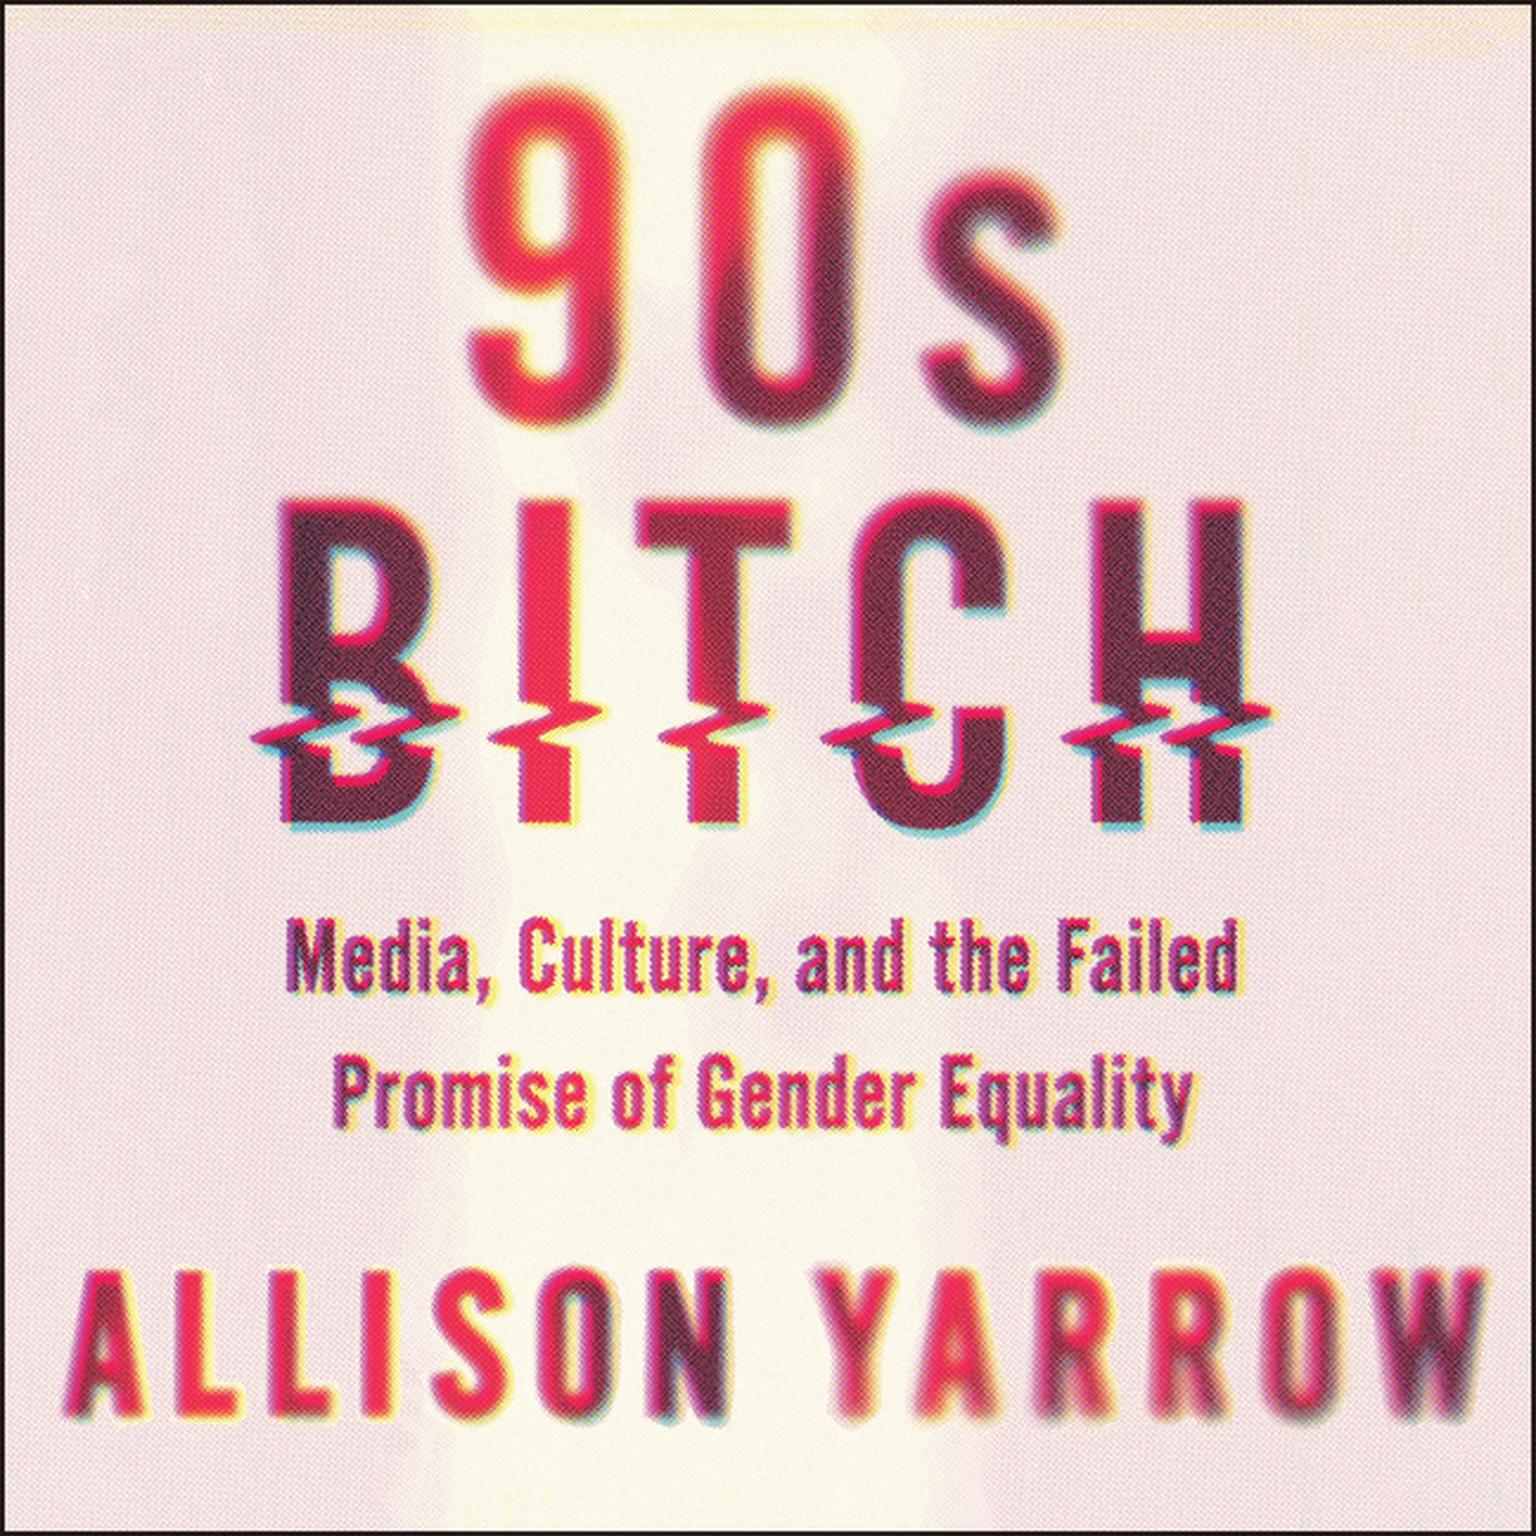 90s Bitch: Media, Culture, and the Failed Promise of Gender Equality Audiobook, by Allison Yarrow